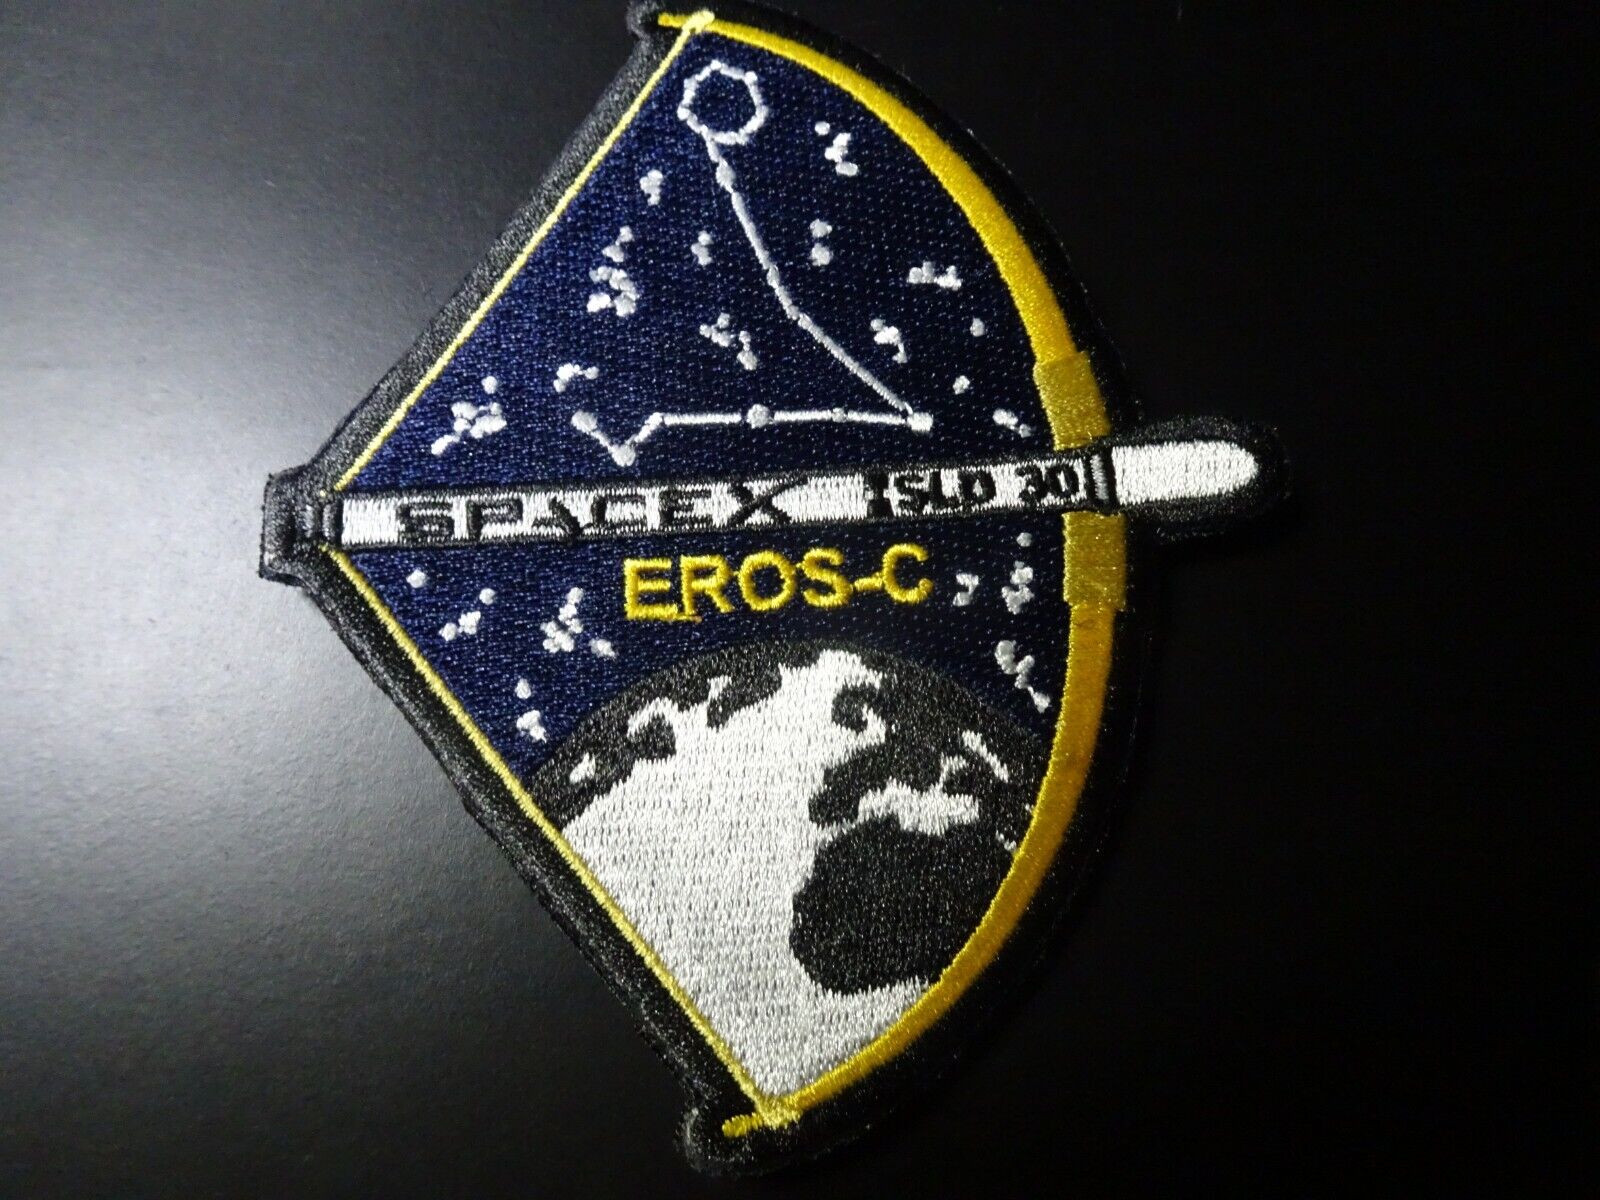 VSFB Western Range SPACEX EROS-C, SLD-30 Mission Patch